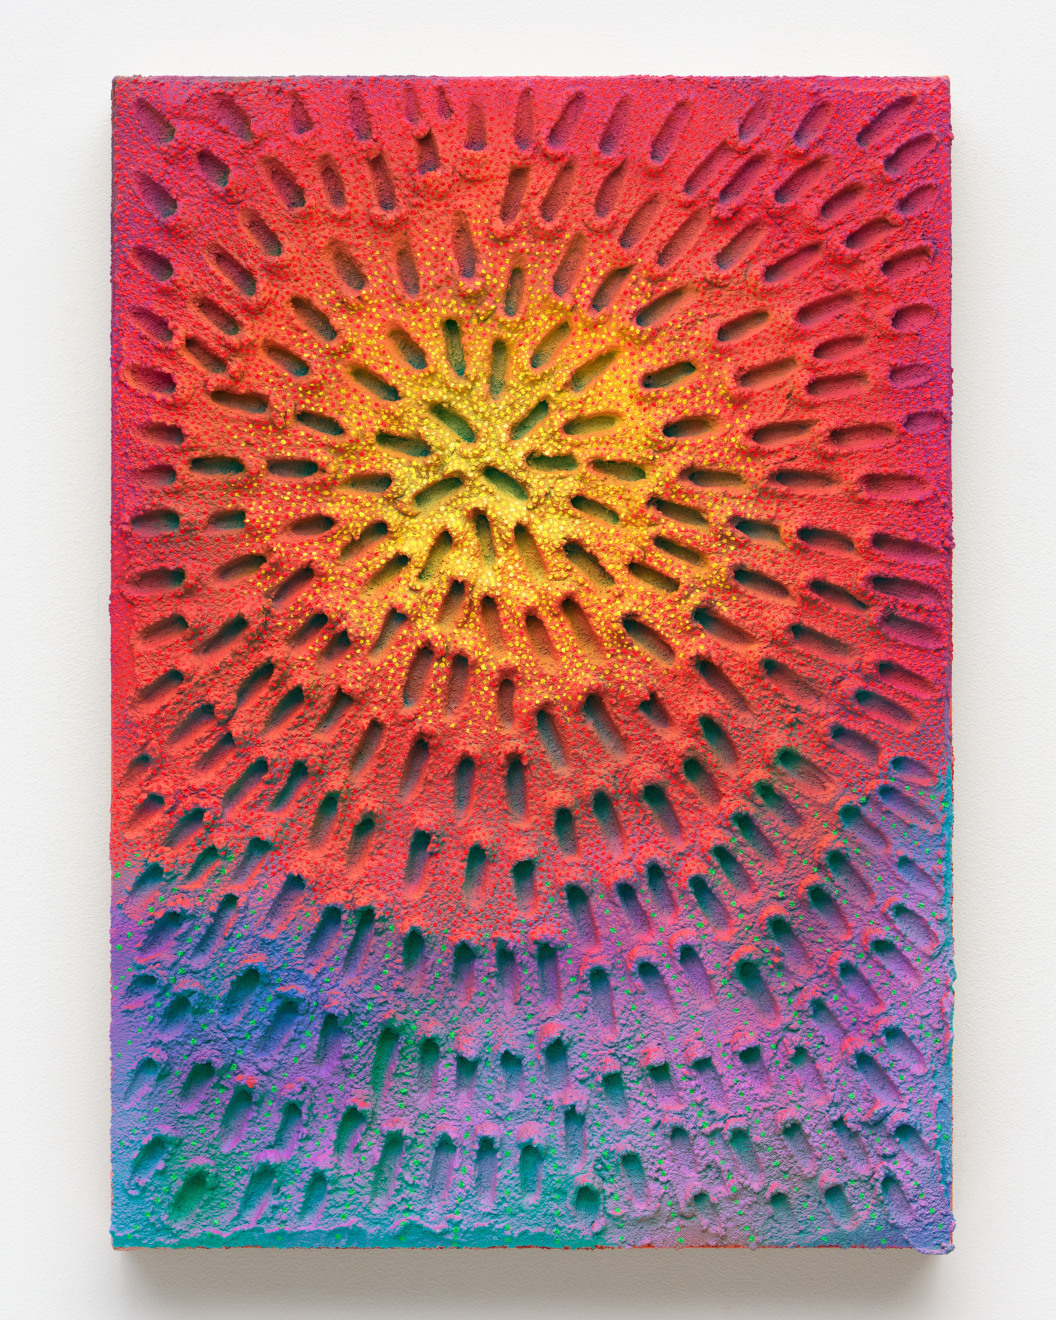 Jennifer Guidi, Eternal Glow (Painted Pink Sand, Teal-Purple-Pink-Red-Orange-Yellow Gradient with Green, Hot Pink and Yellow, Orange and Red Ground), 2022